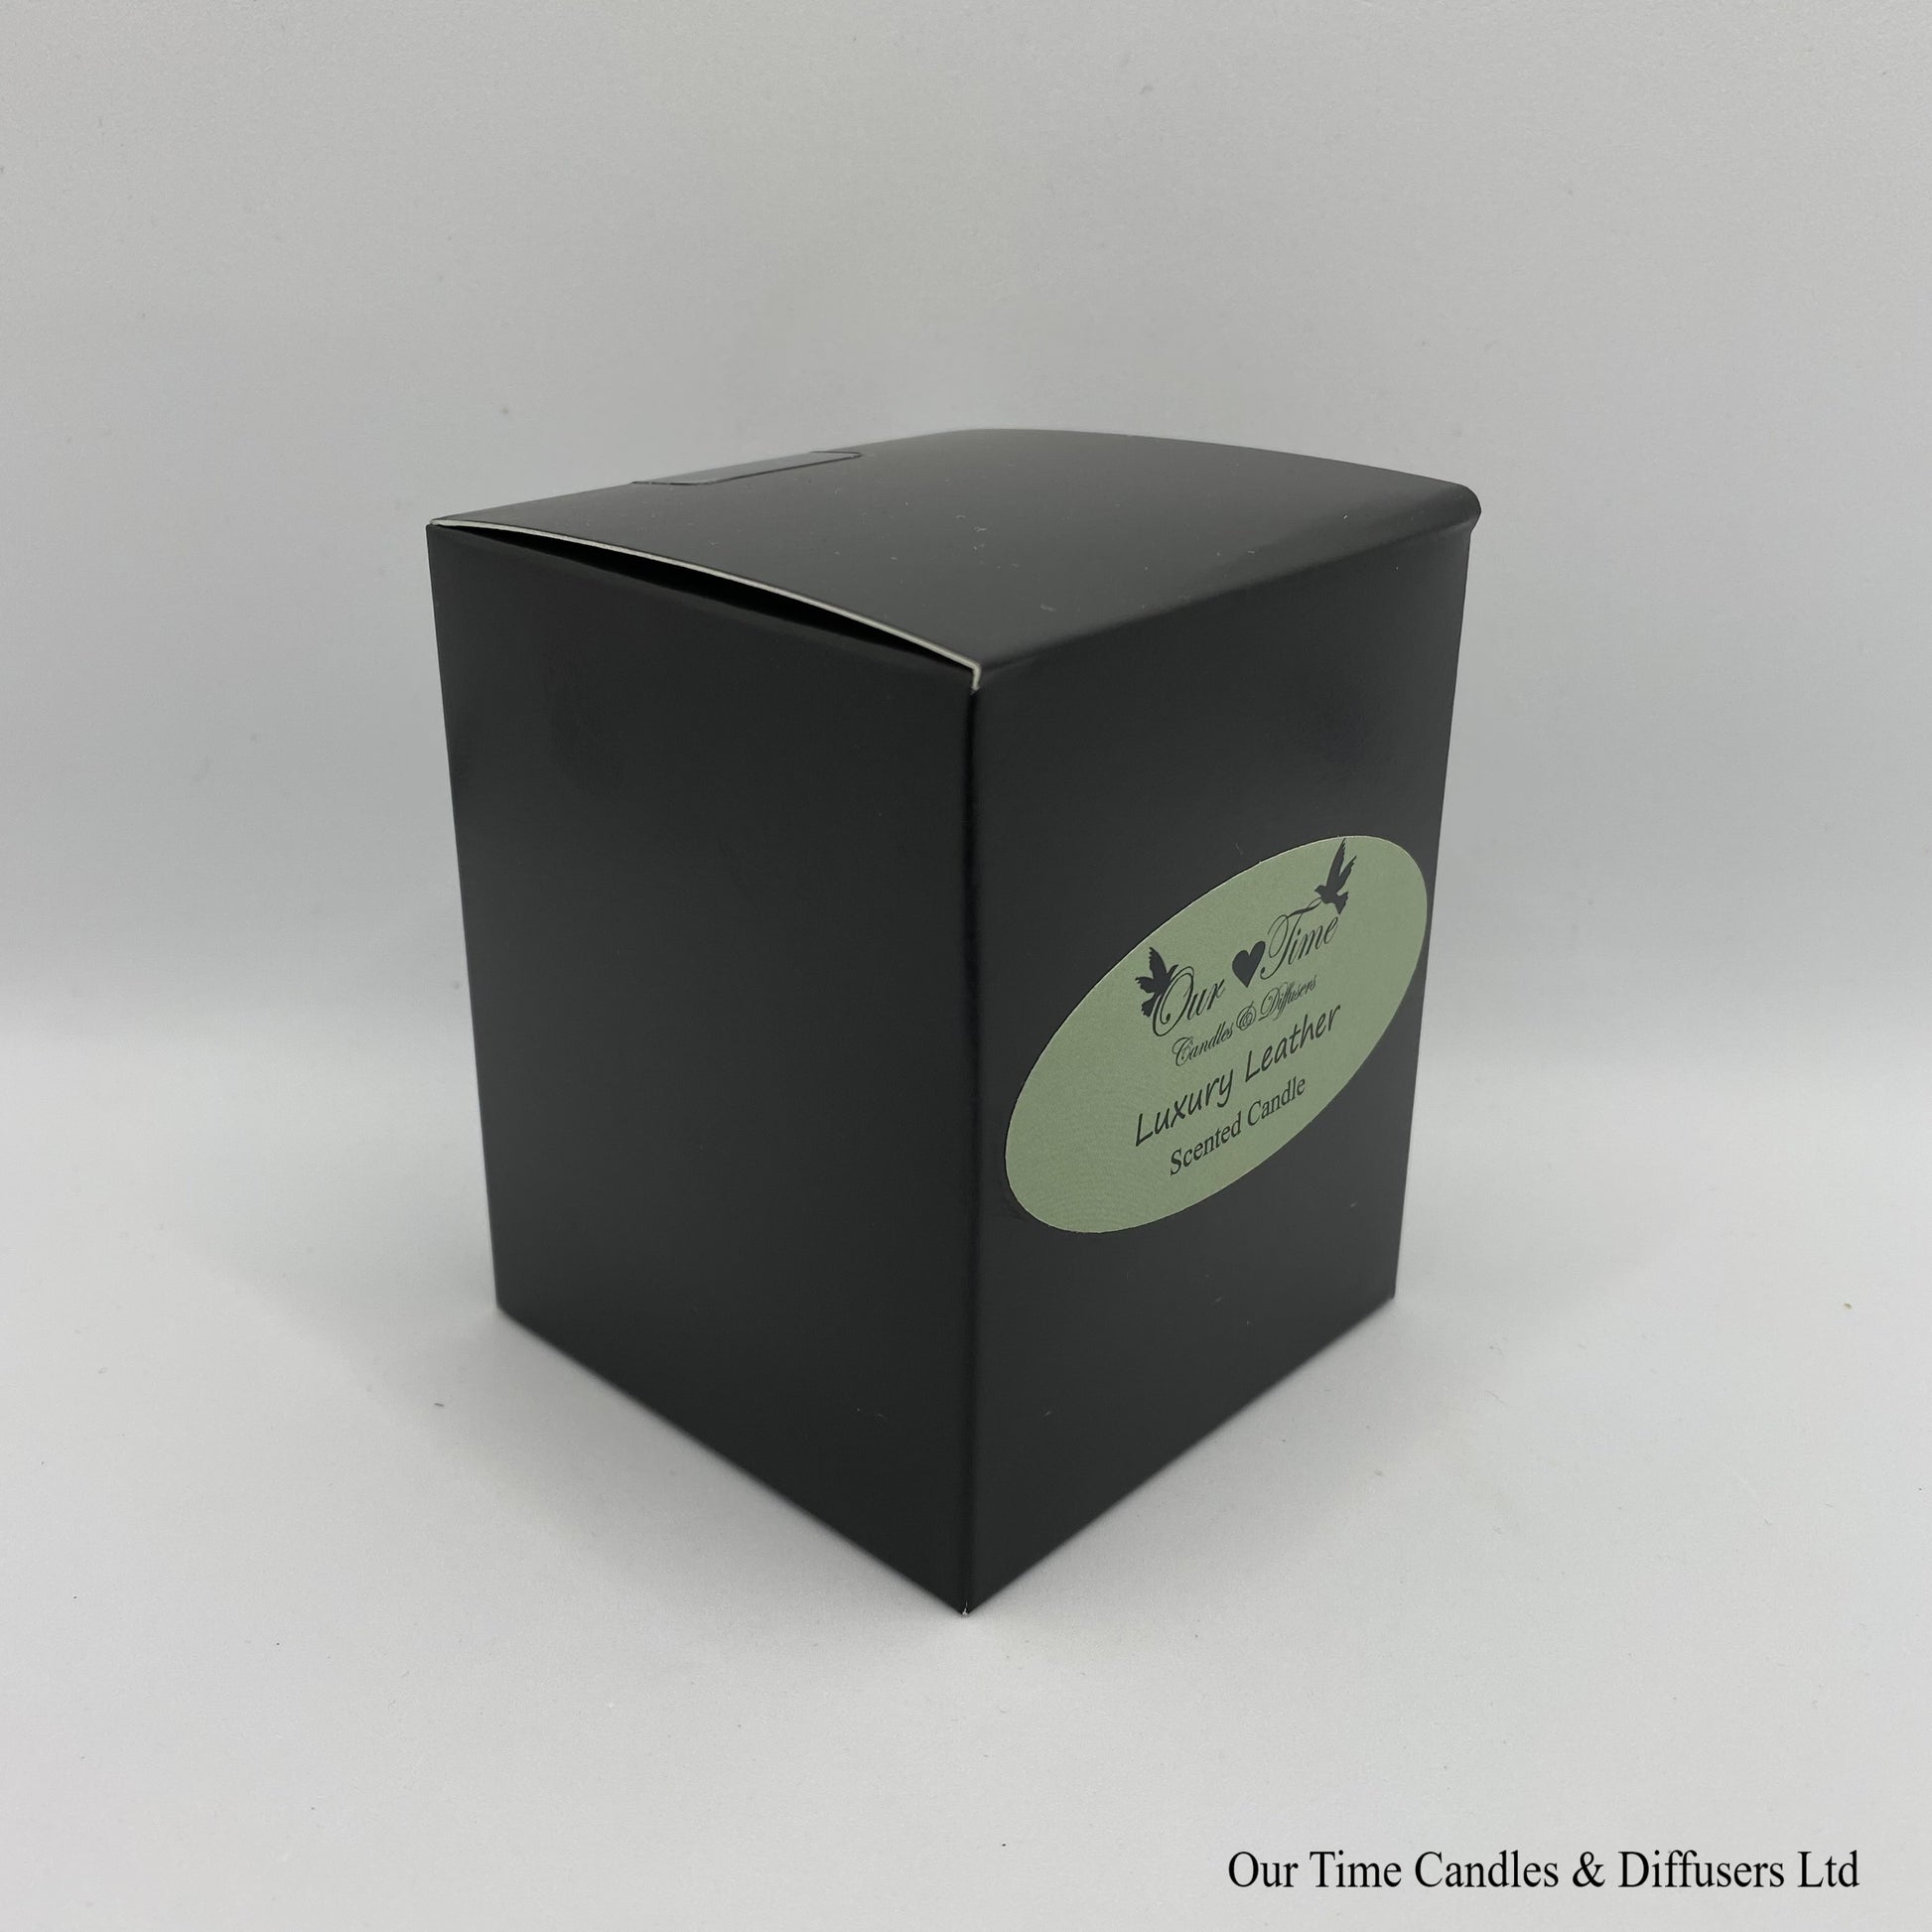 Medium Wax Filled Scented Candle Luxury Leather